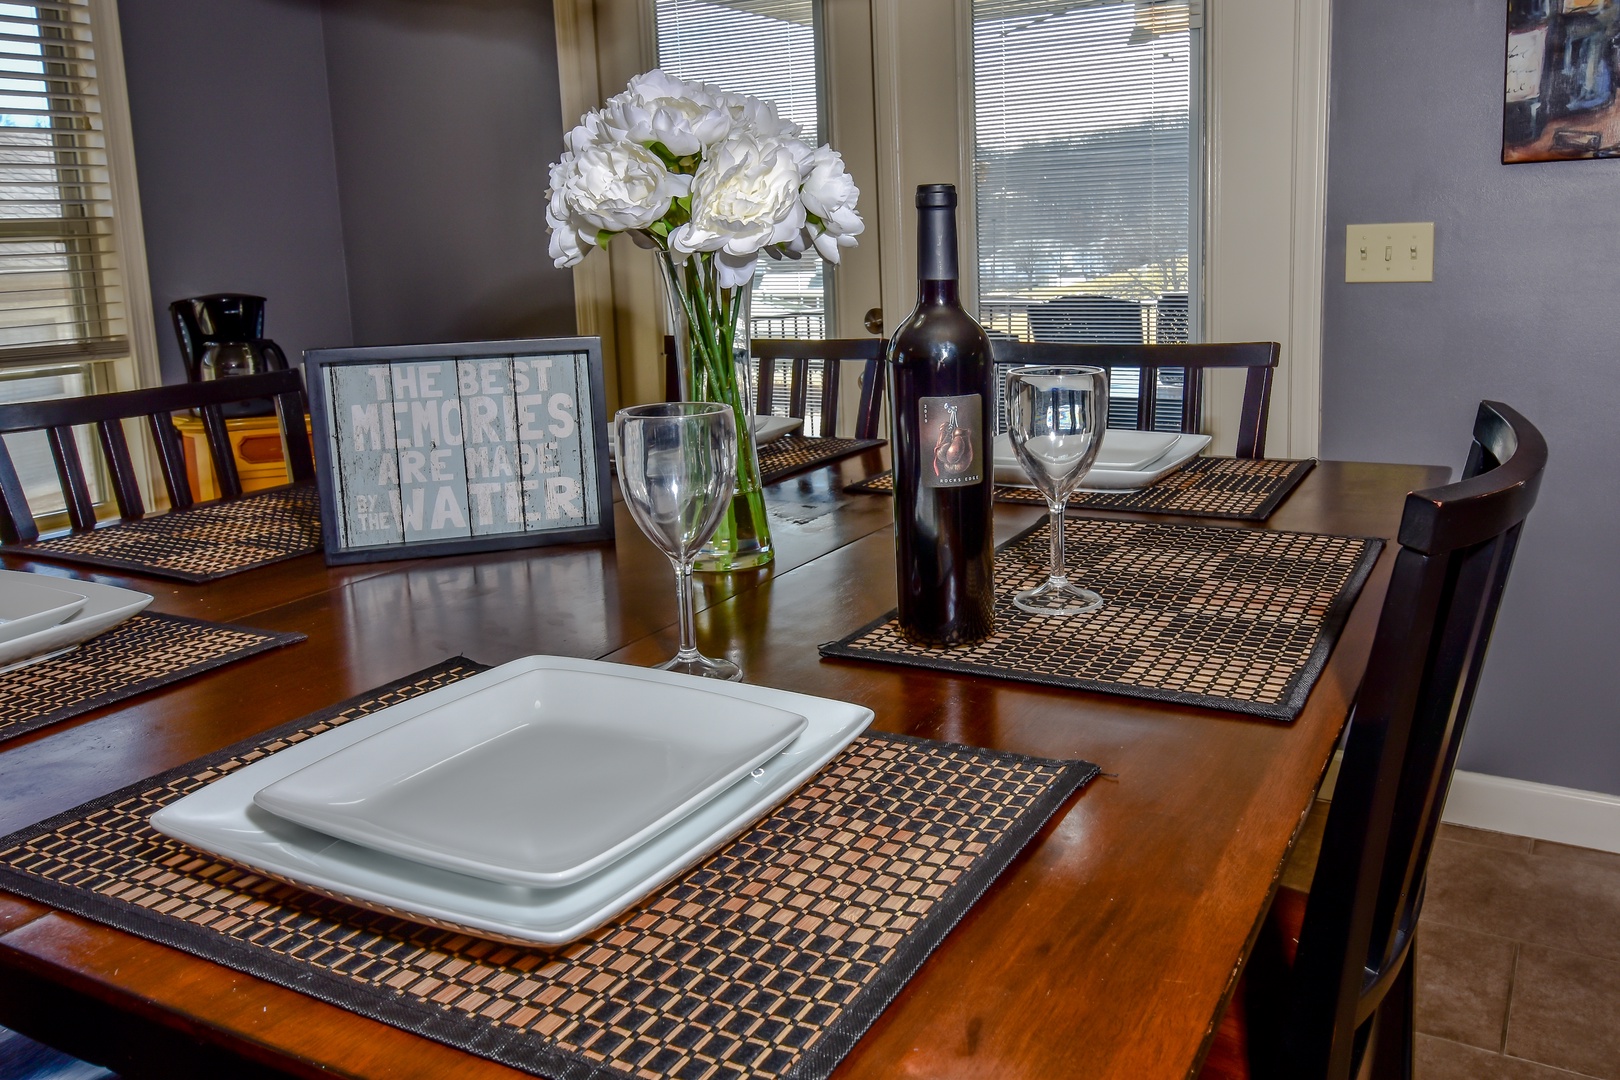 Gather for meals together at the dining table, with seating for 6